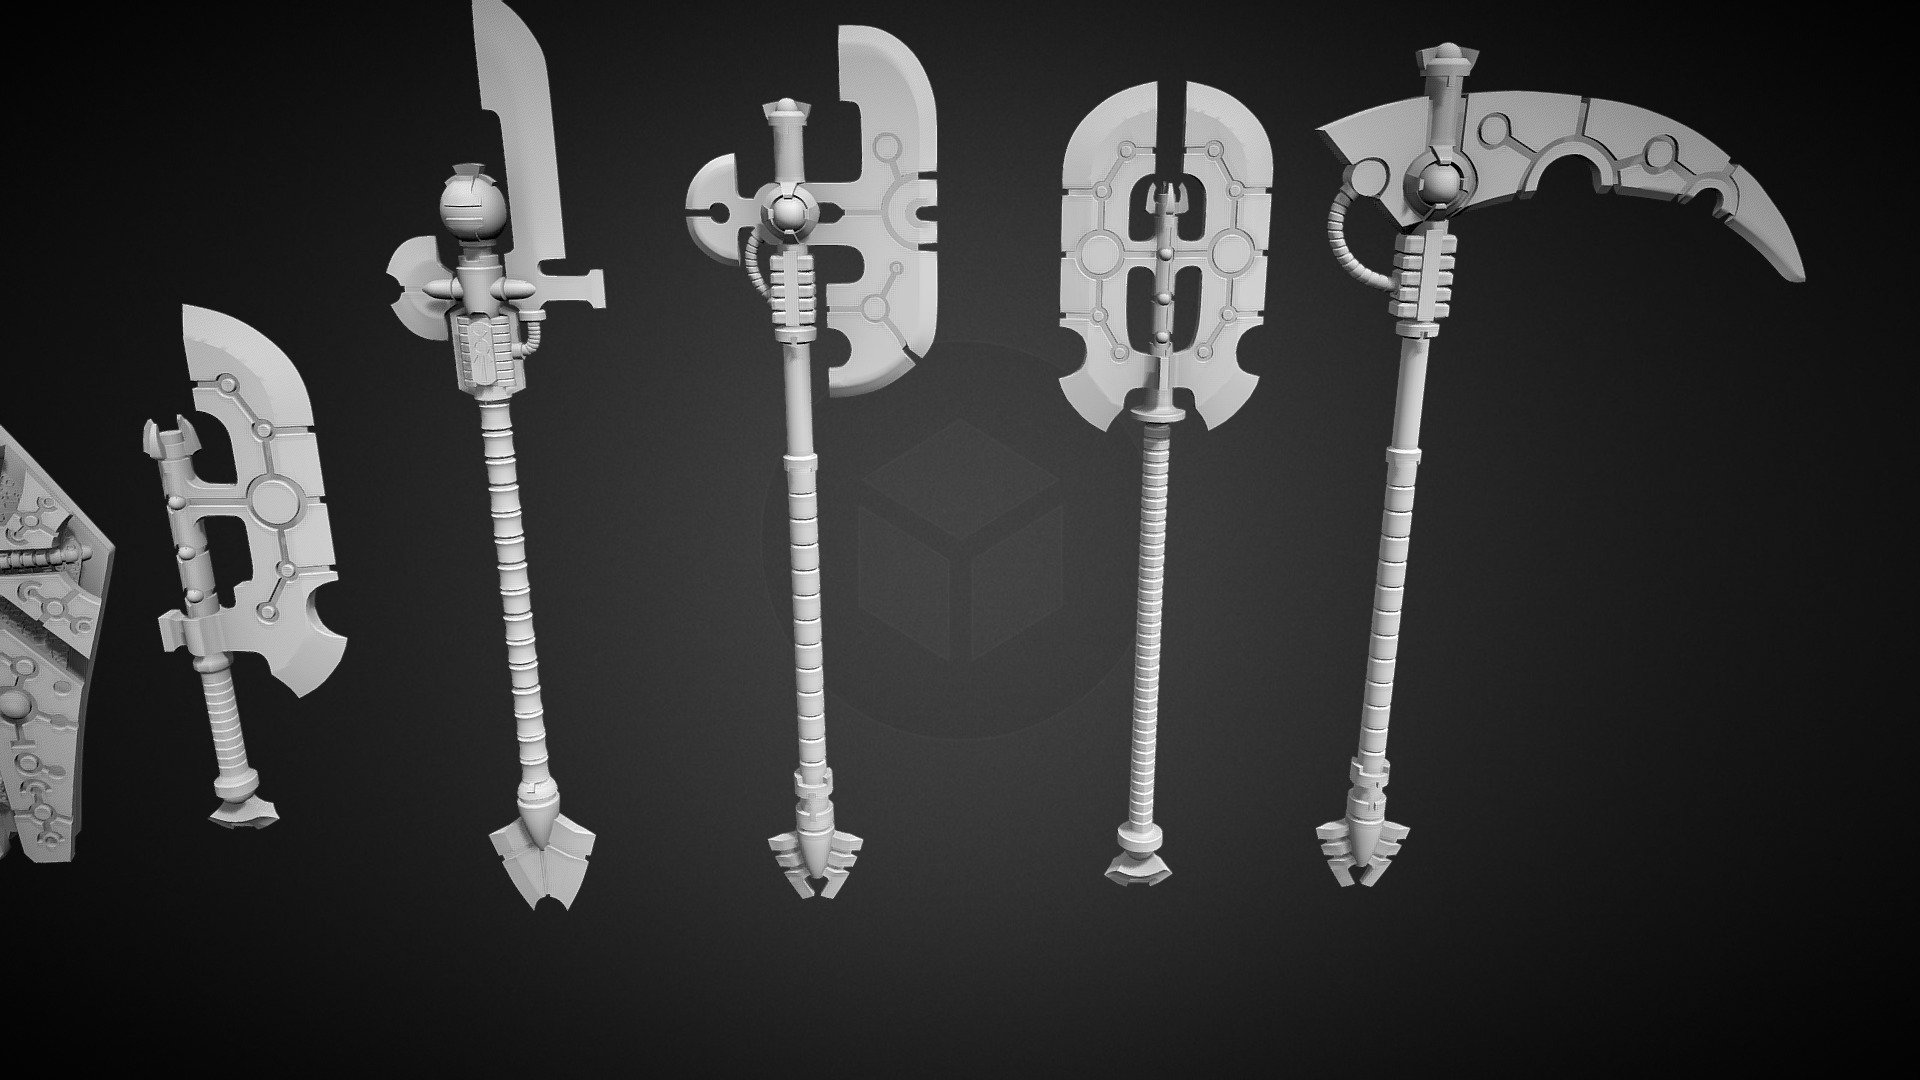 PREVIEW - 3D model by martin.letiec [1fe129a] - Sketchfab